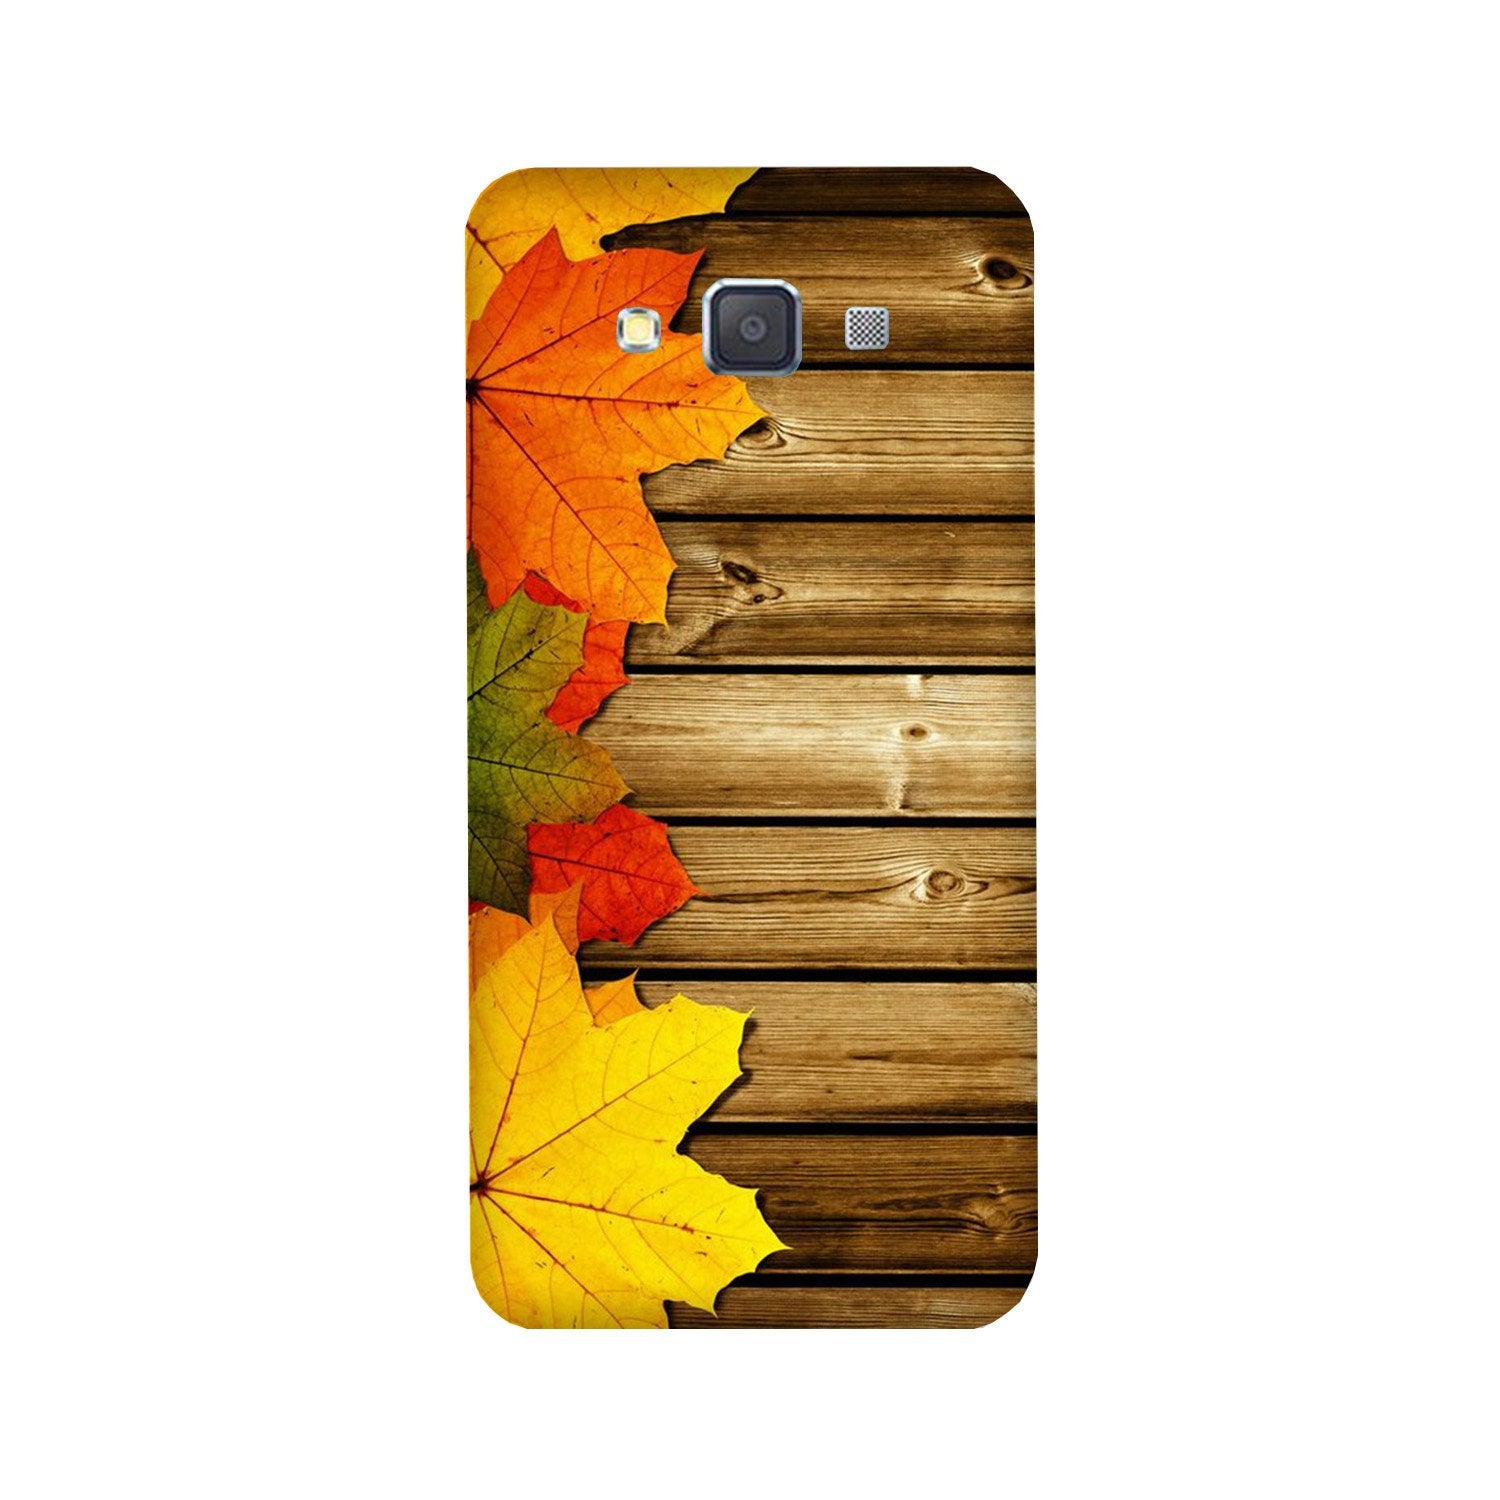 Wooden look3 Case for Galaxy Grand Prime